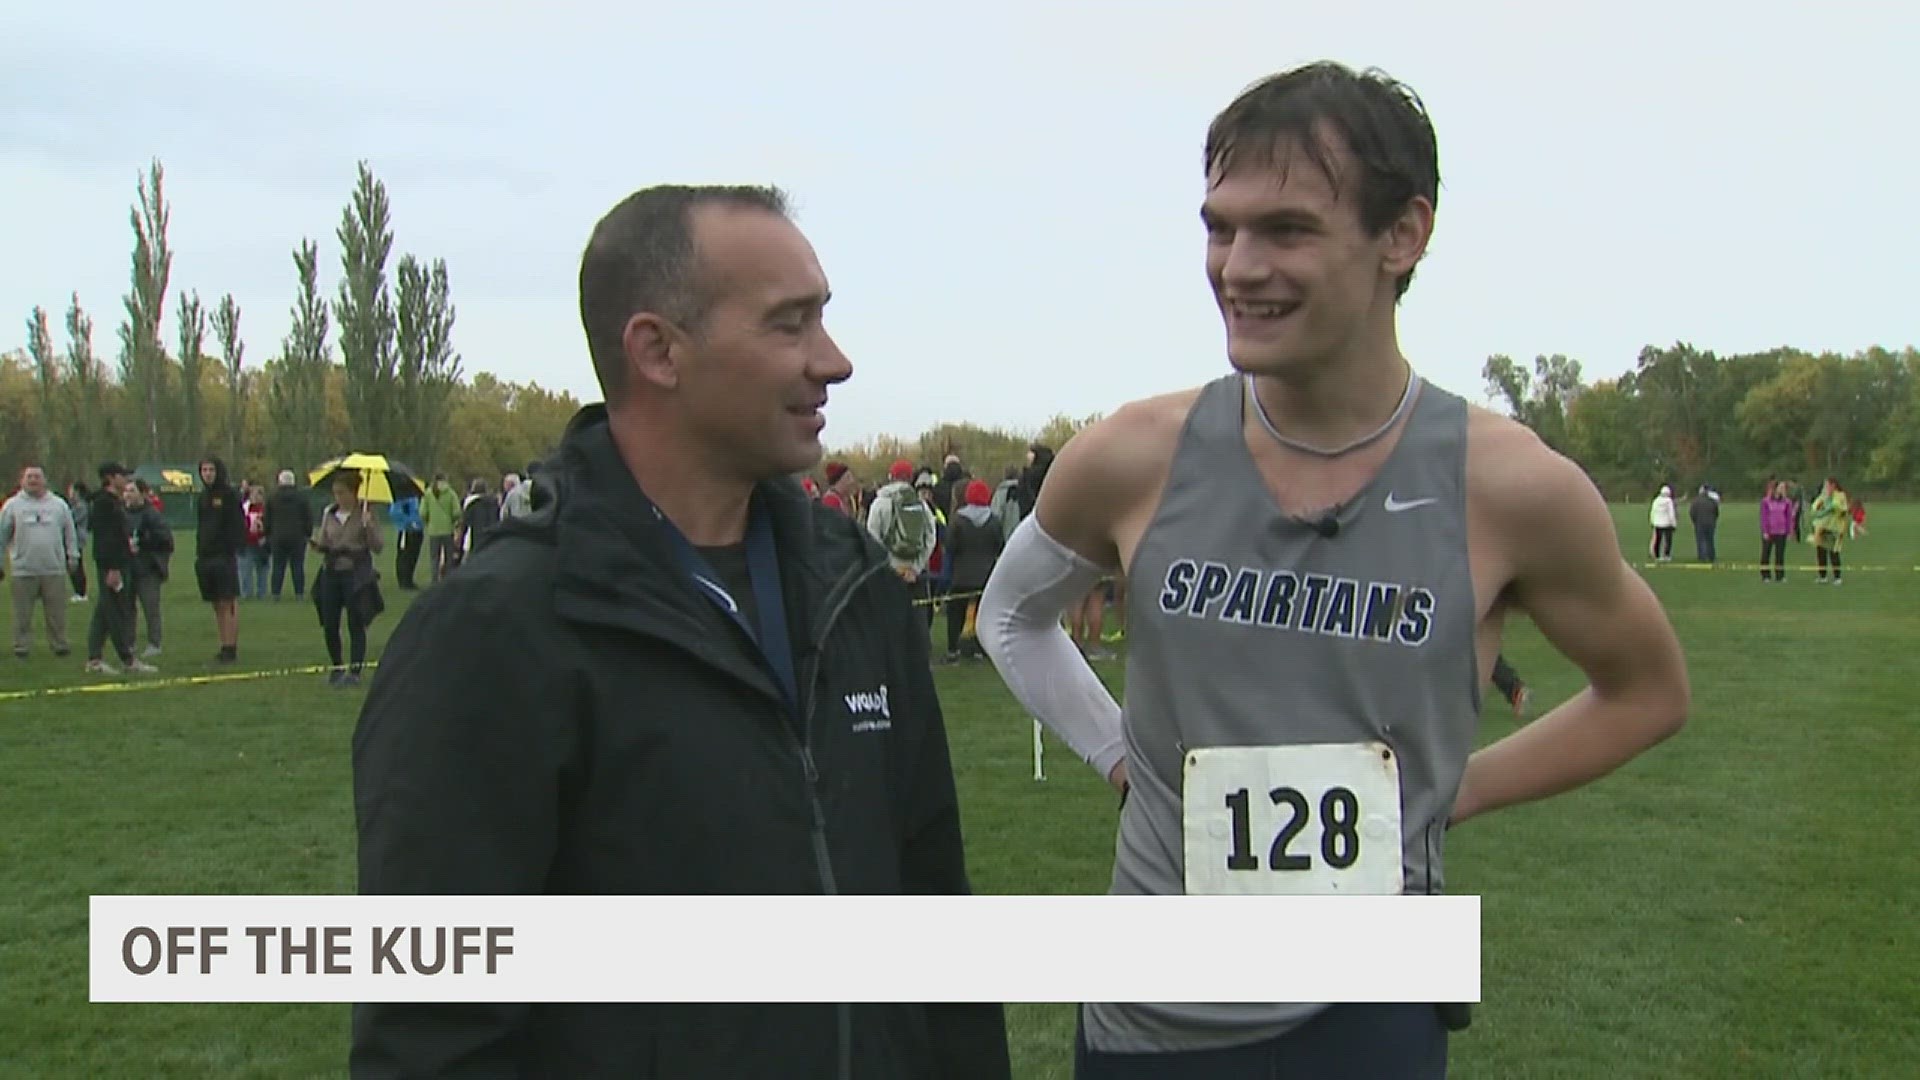 Rekow won the MAC cross country title while wearing only one shoe.